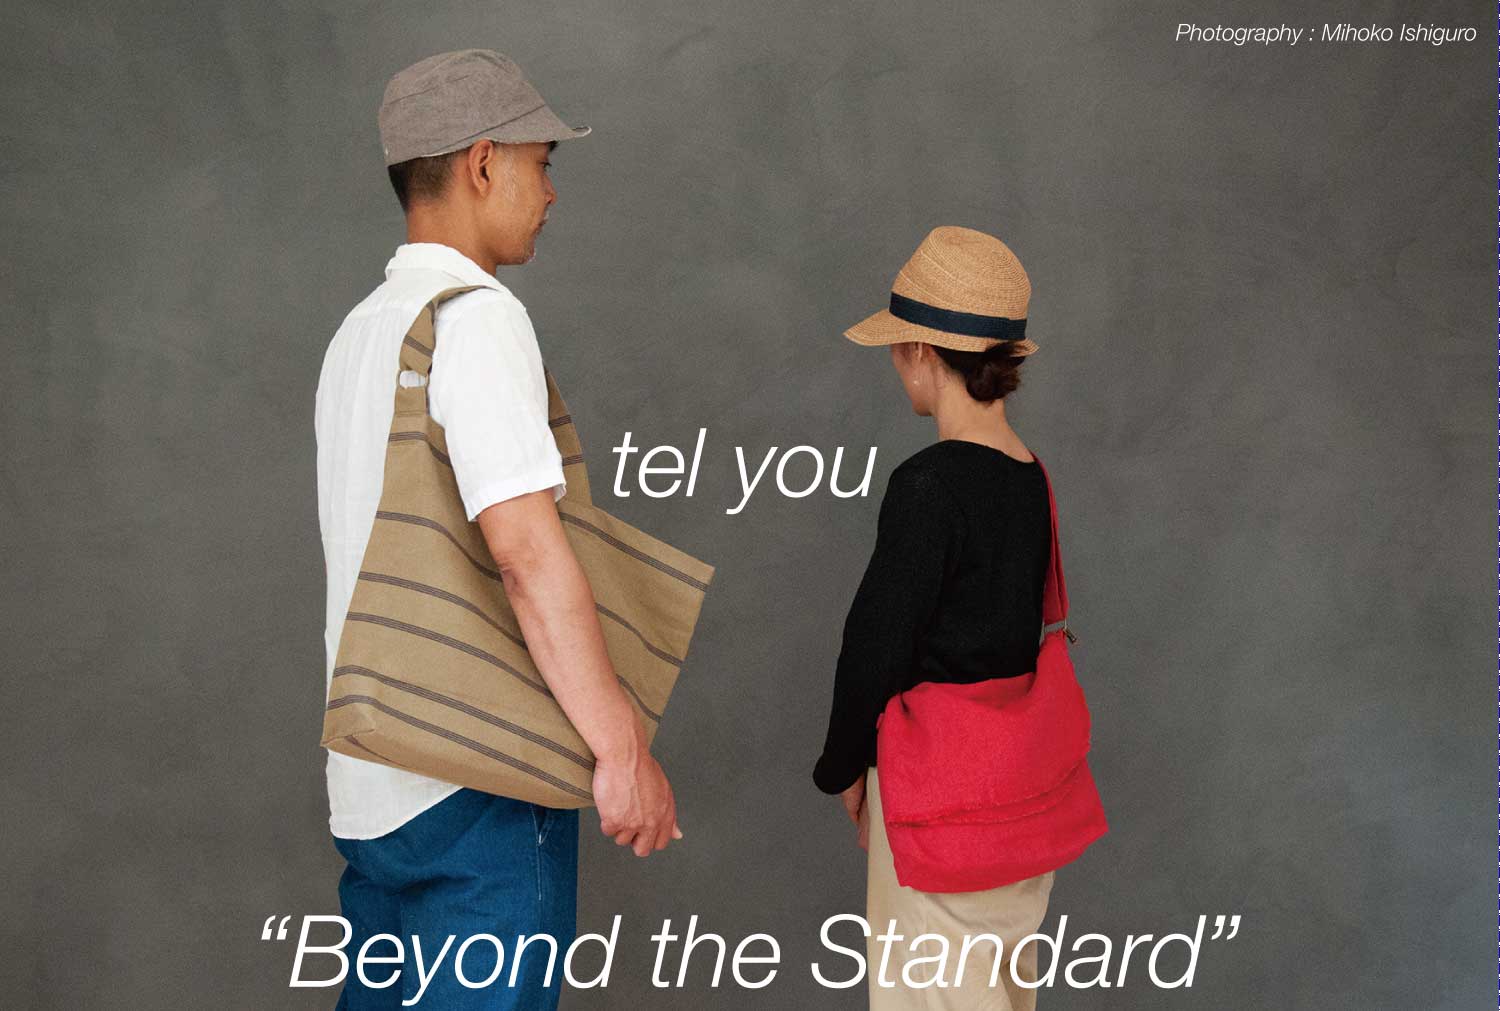 tel you EXHIBITION "Beyond the Standard"